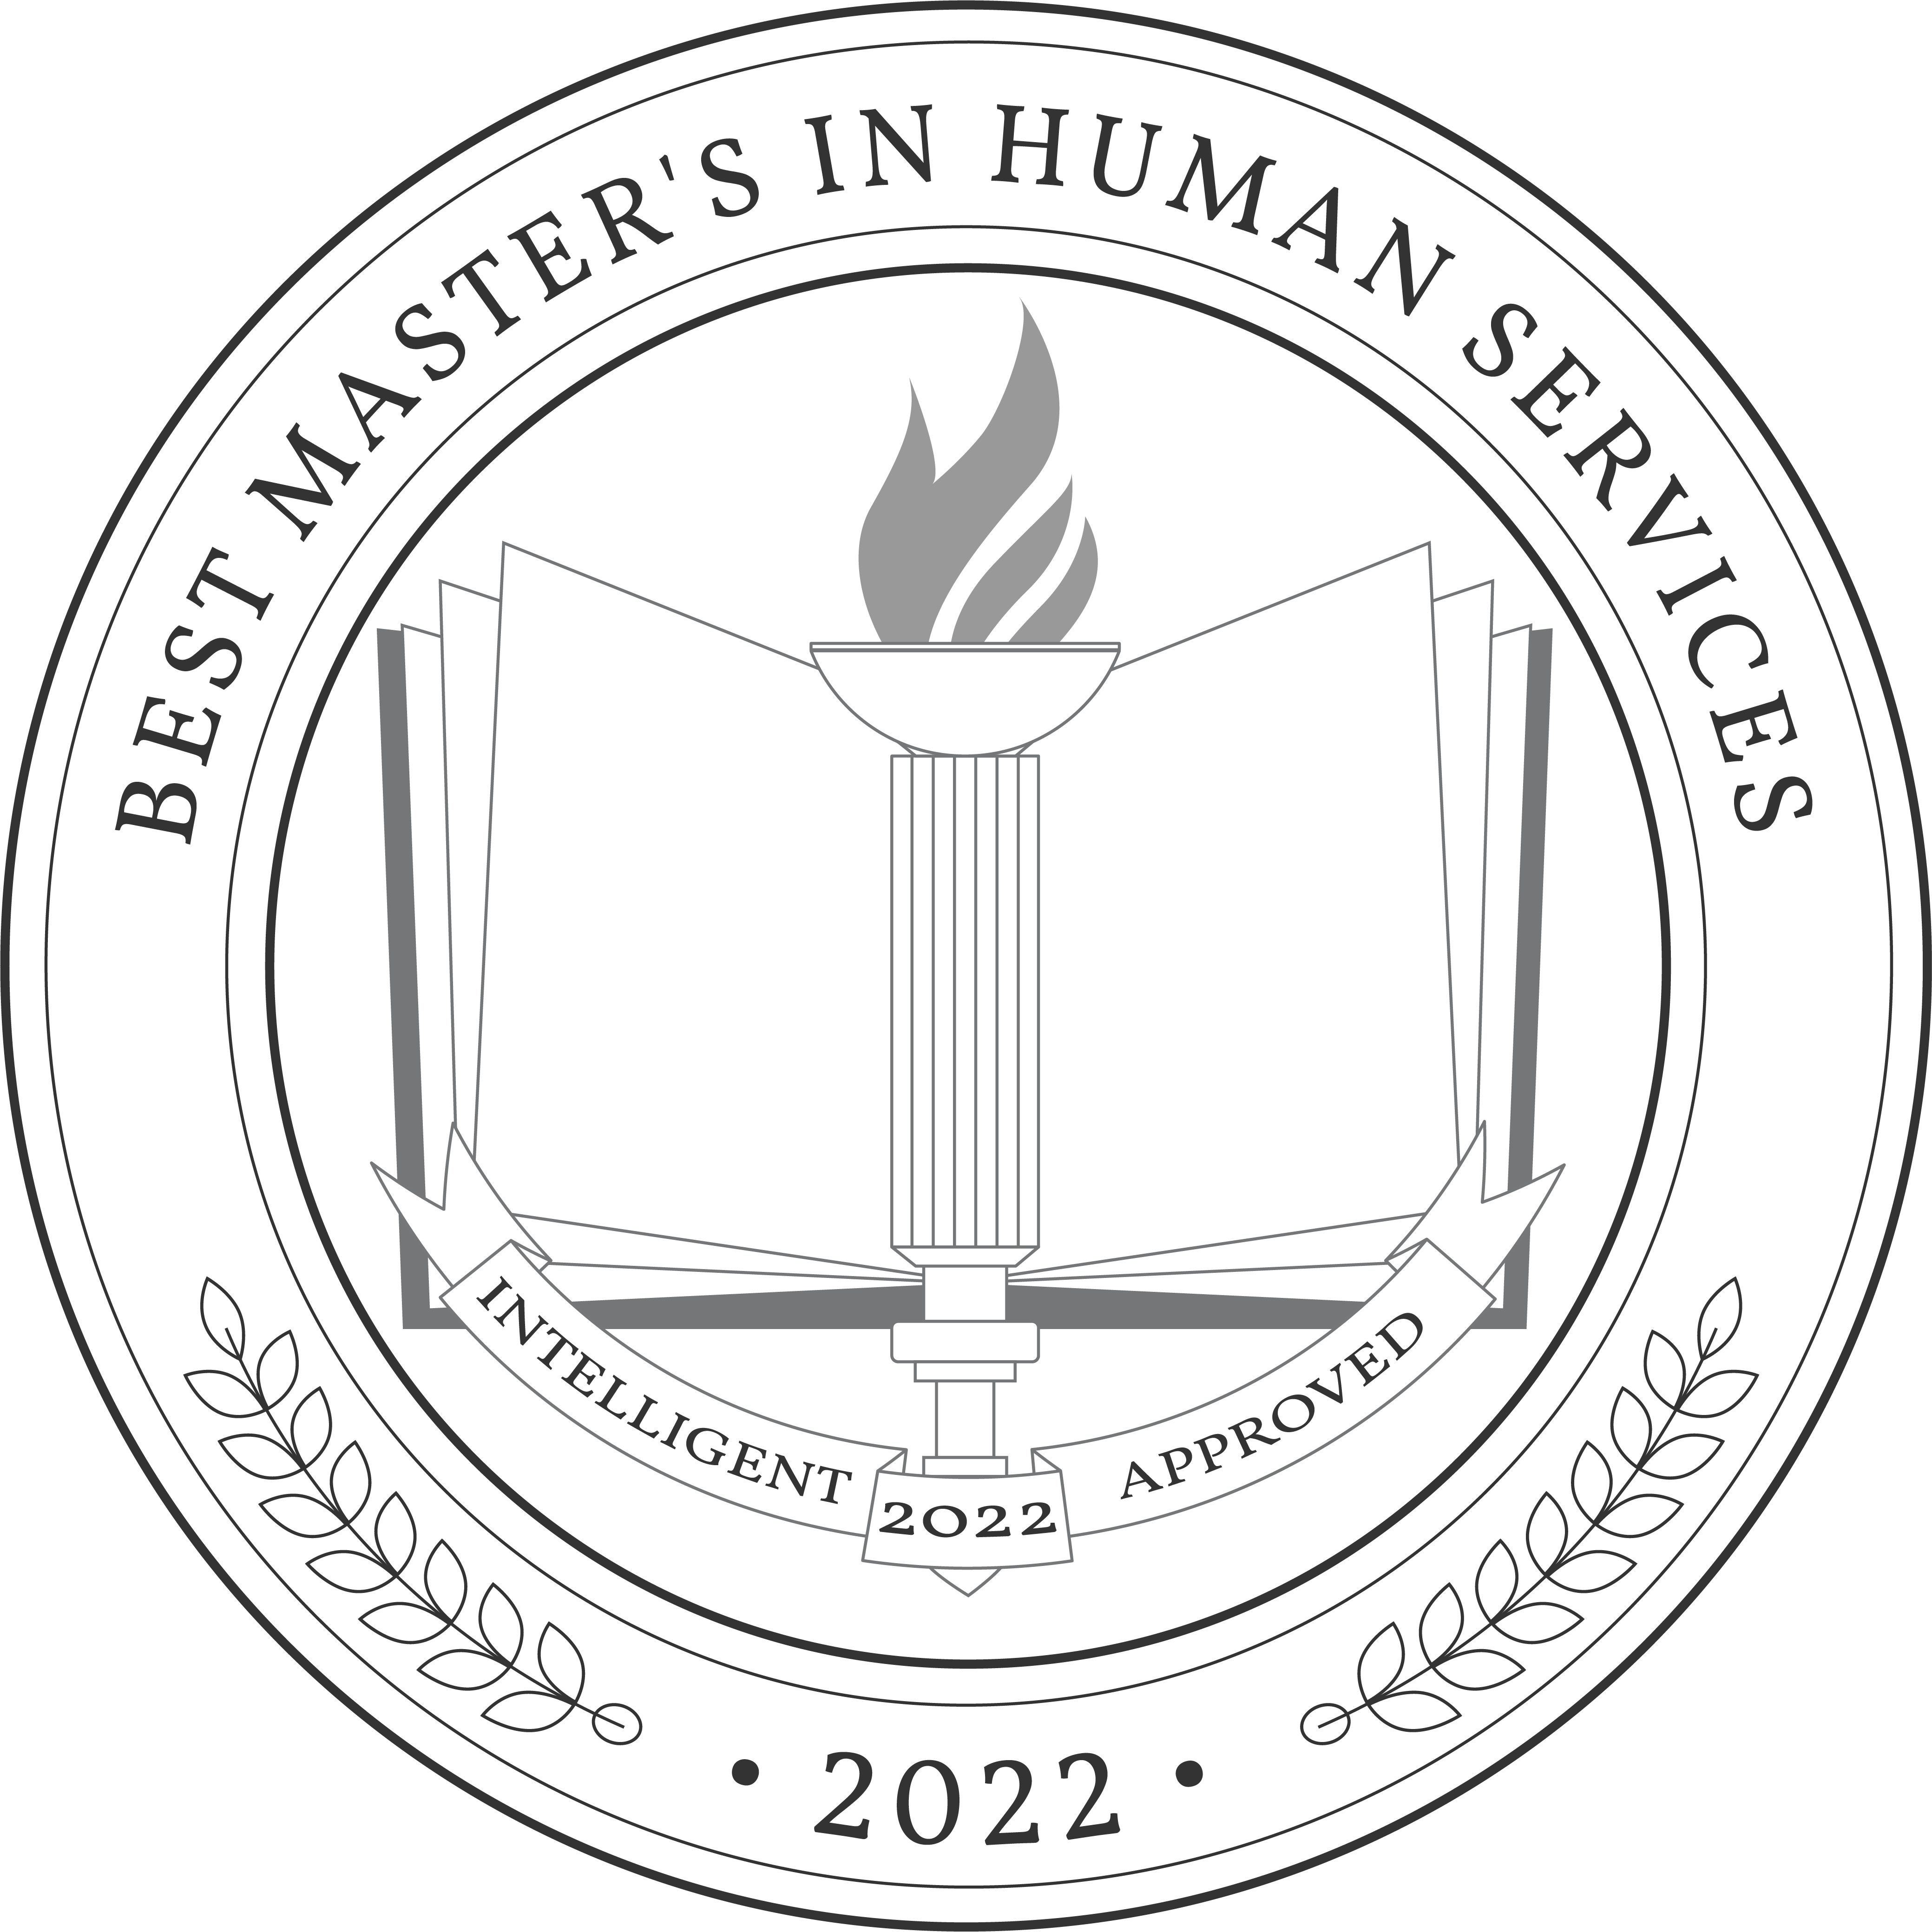 Best Master's in Human Services Badge-1